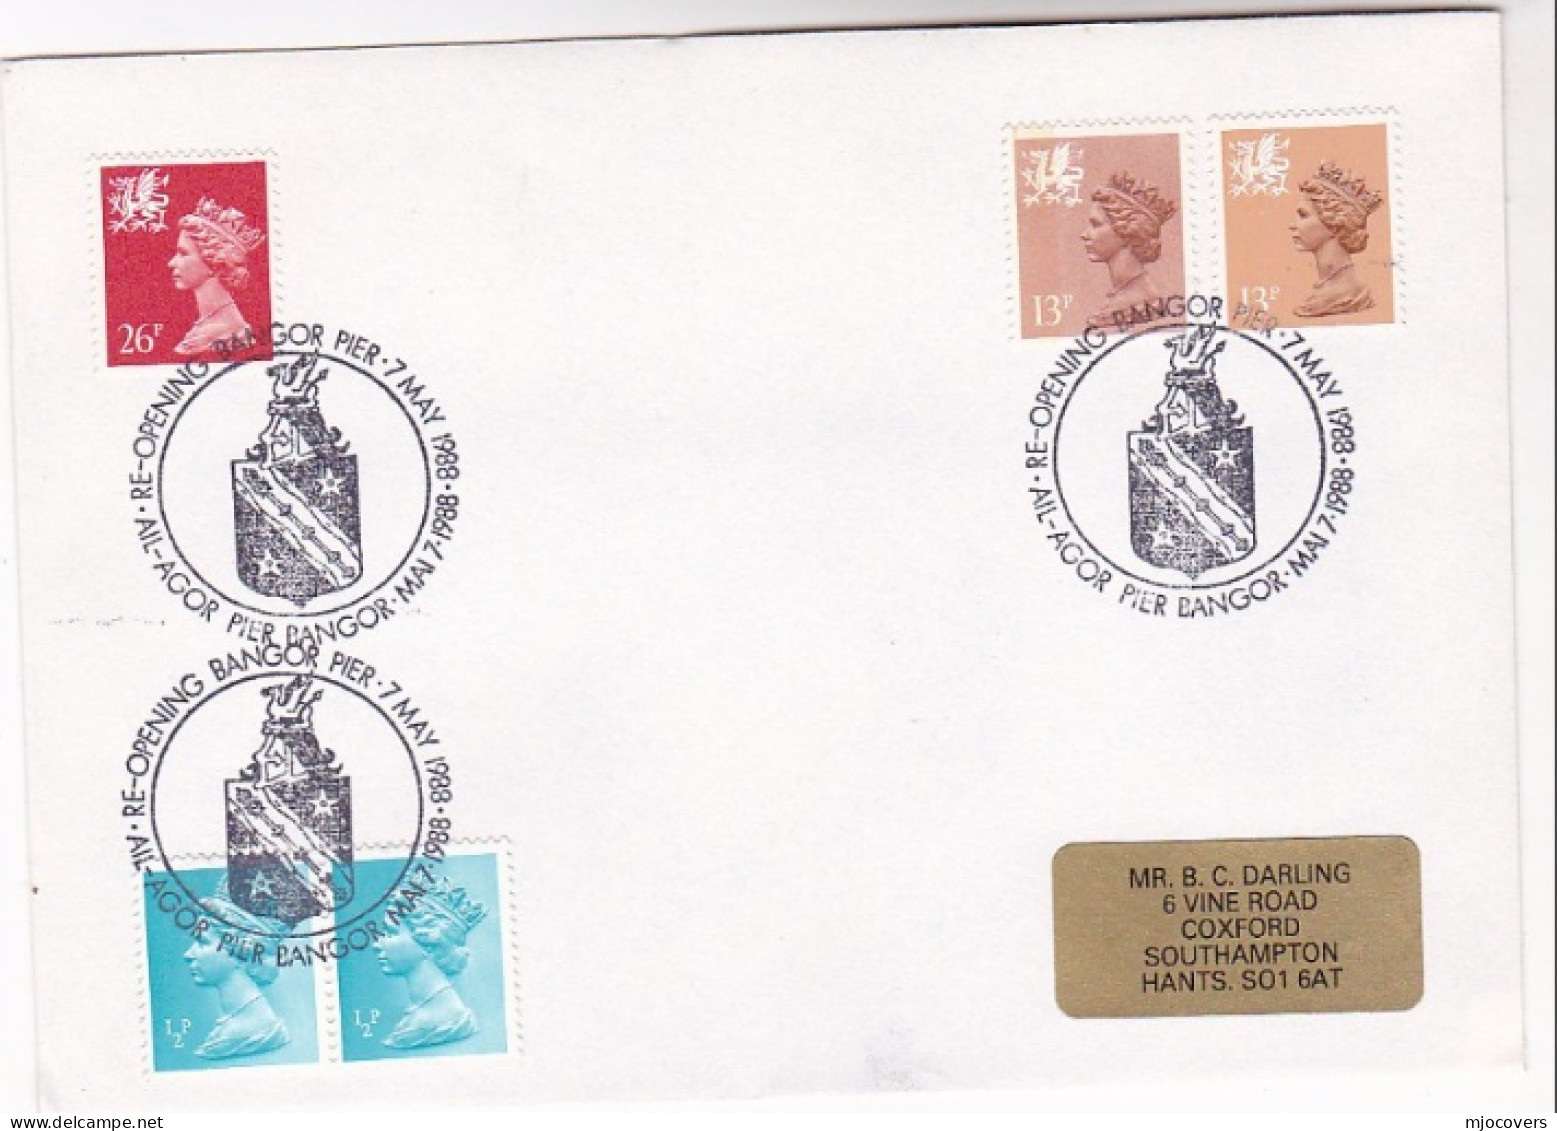 1988 BANGOR PIER Reopens EVENT COVER Dragon Coat Of Arms Wales GB Stamps - Mythologie